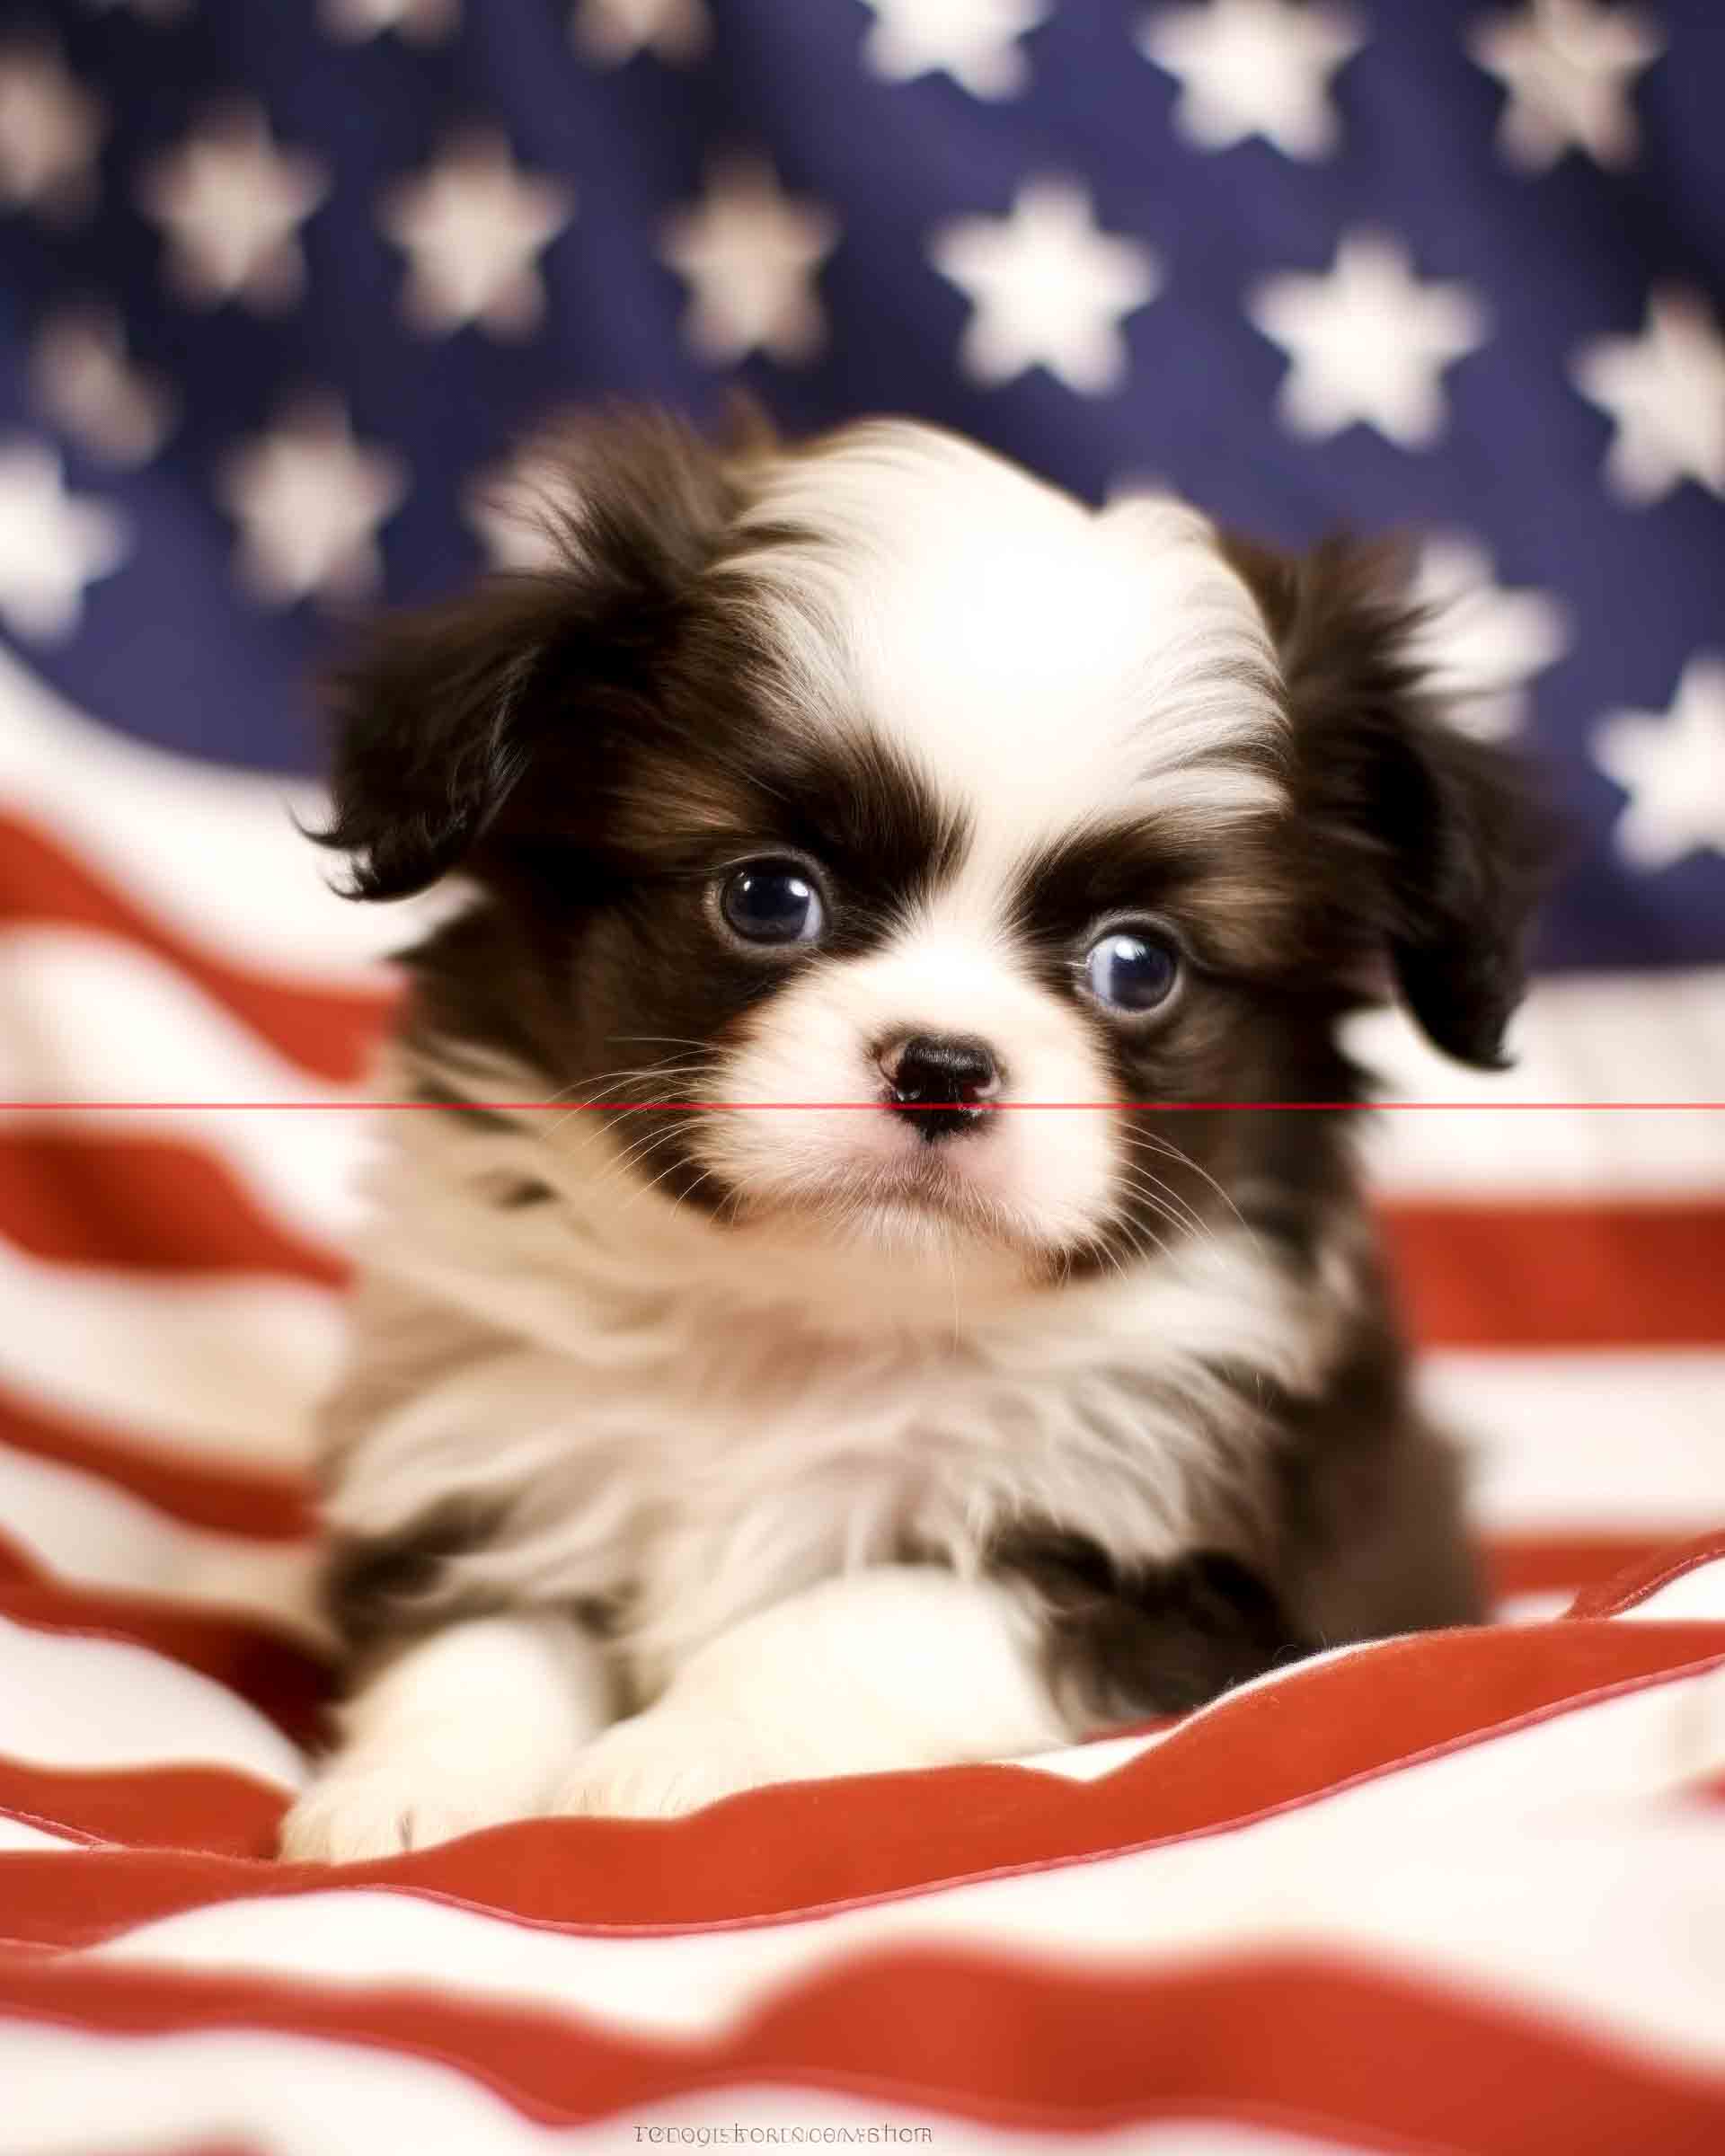 A picture of a japanese chin dog in front of an american flag adding a patriotic touch to the image, the dog has black and white fur, dark eyes, and a sweet expression